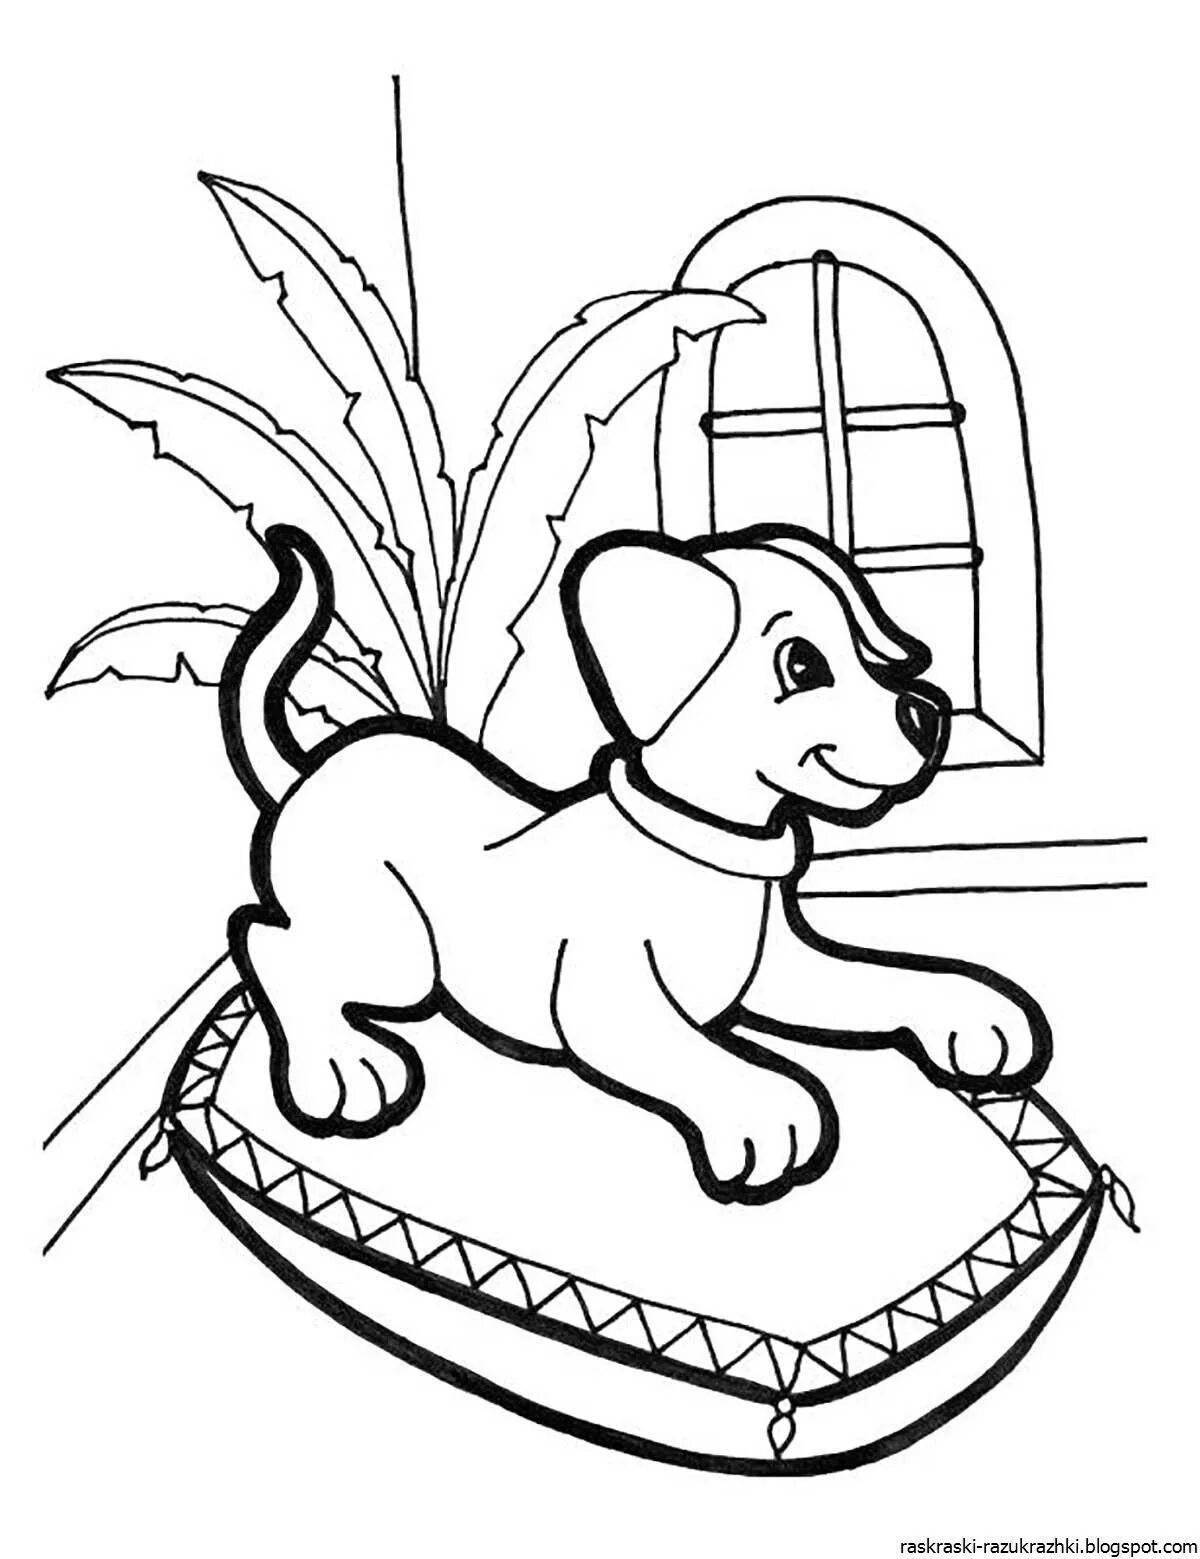 Coloring page friendly kitten and dog